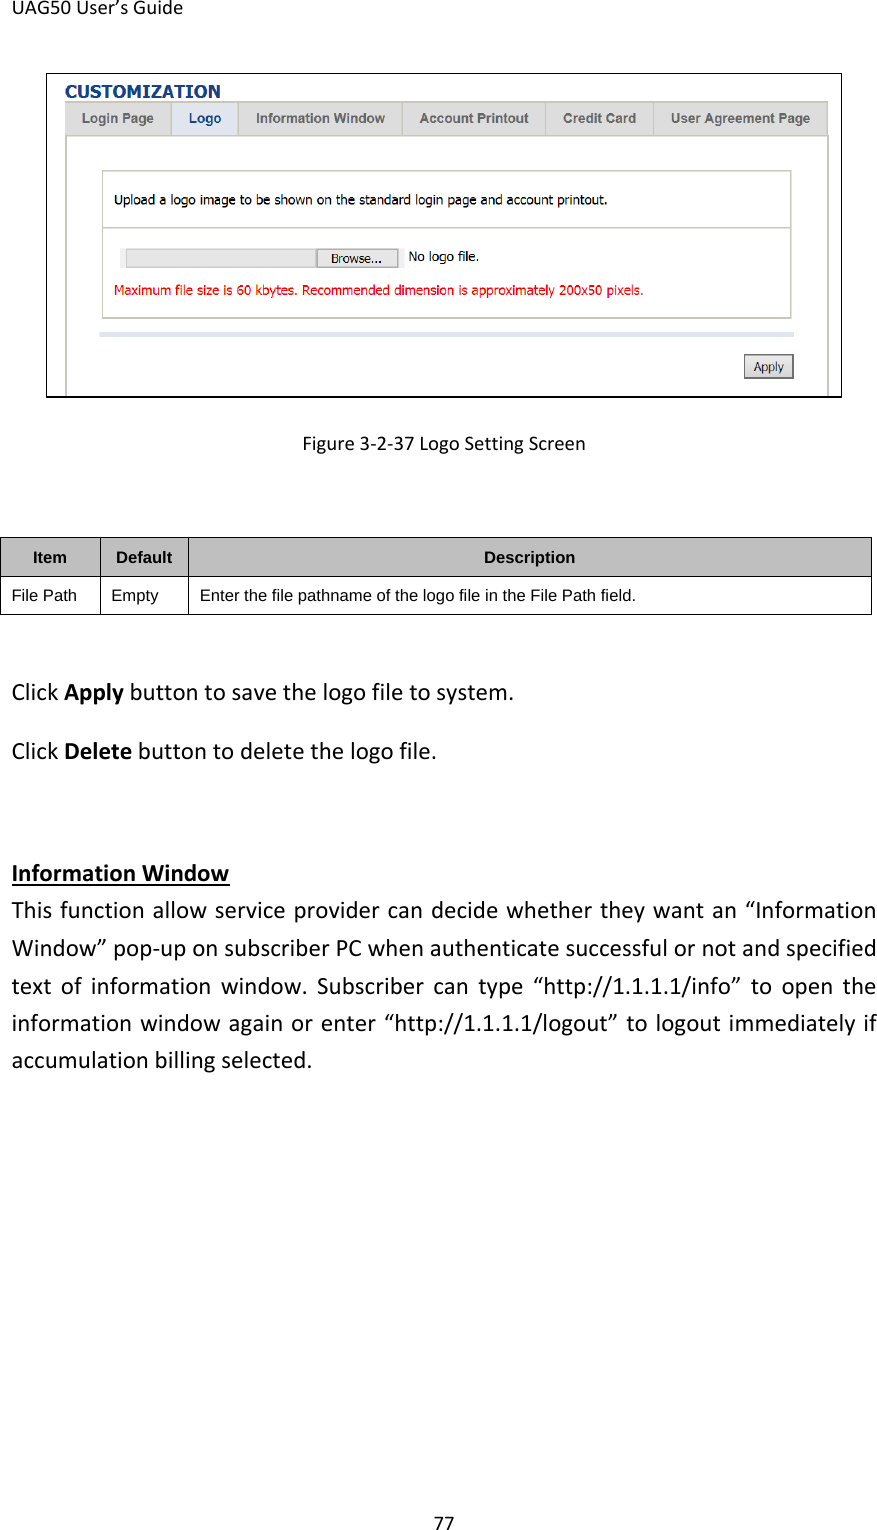 UAG50 User’s Guide 77  Figure 3-2-37 Logo Setting Screen  Item Default Description File Path Empty Enter the file pathname of the logo file in the File Path field.  Click Apply button to save the logo file to system. Click Delete button to delete the logo file.  This function allow service provider can decide whether they want an “Information Window” pop-up on subscriber PC when authenticate successful or not and specified text of information window. Subscriber can type “http://1.1.1.1/info” to open the information window again or enter “http://1.1.1.1/logout” to logout immediately if accumulation billing selected. Information Window 